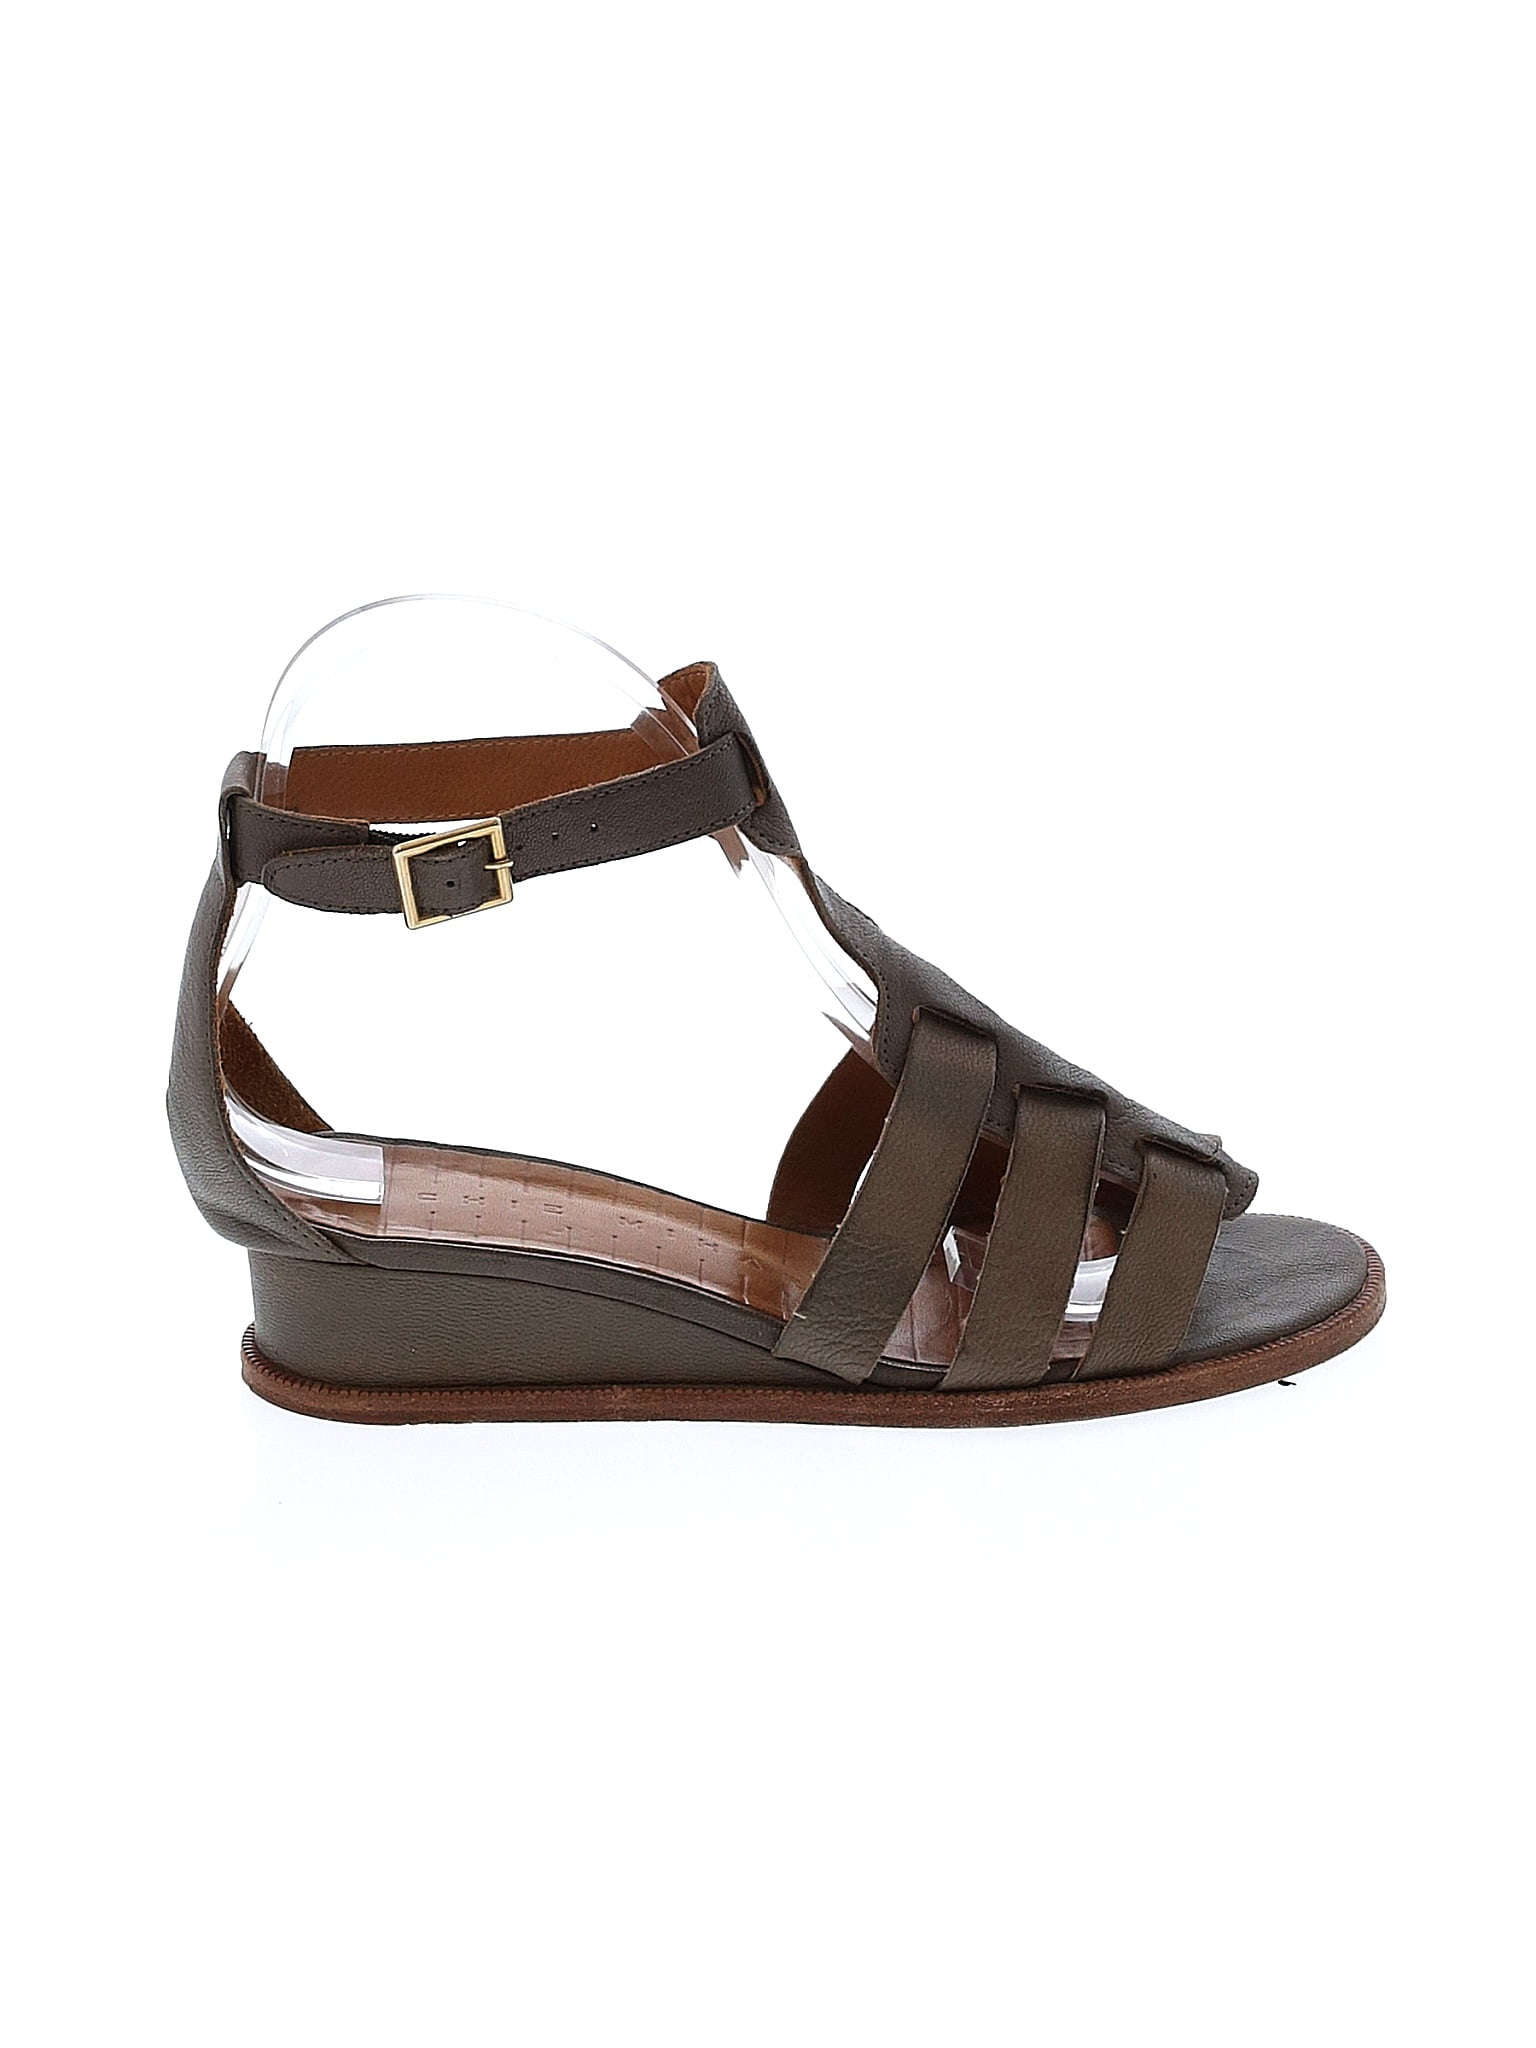 Chie Mihara 100% Leather Brown Wedges Size 36 (EU) - 77% off | thredUP